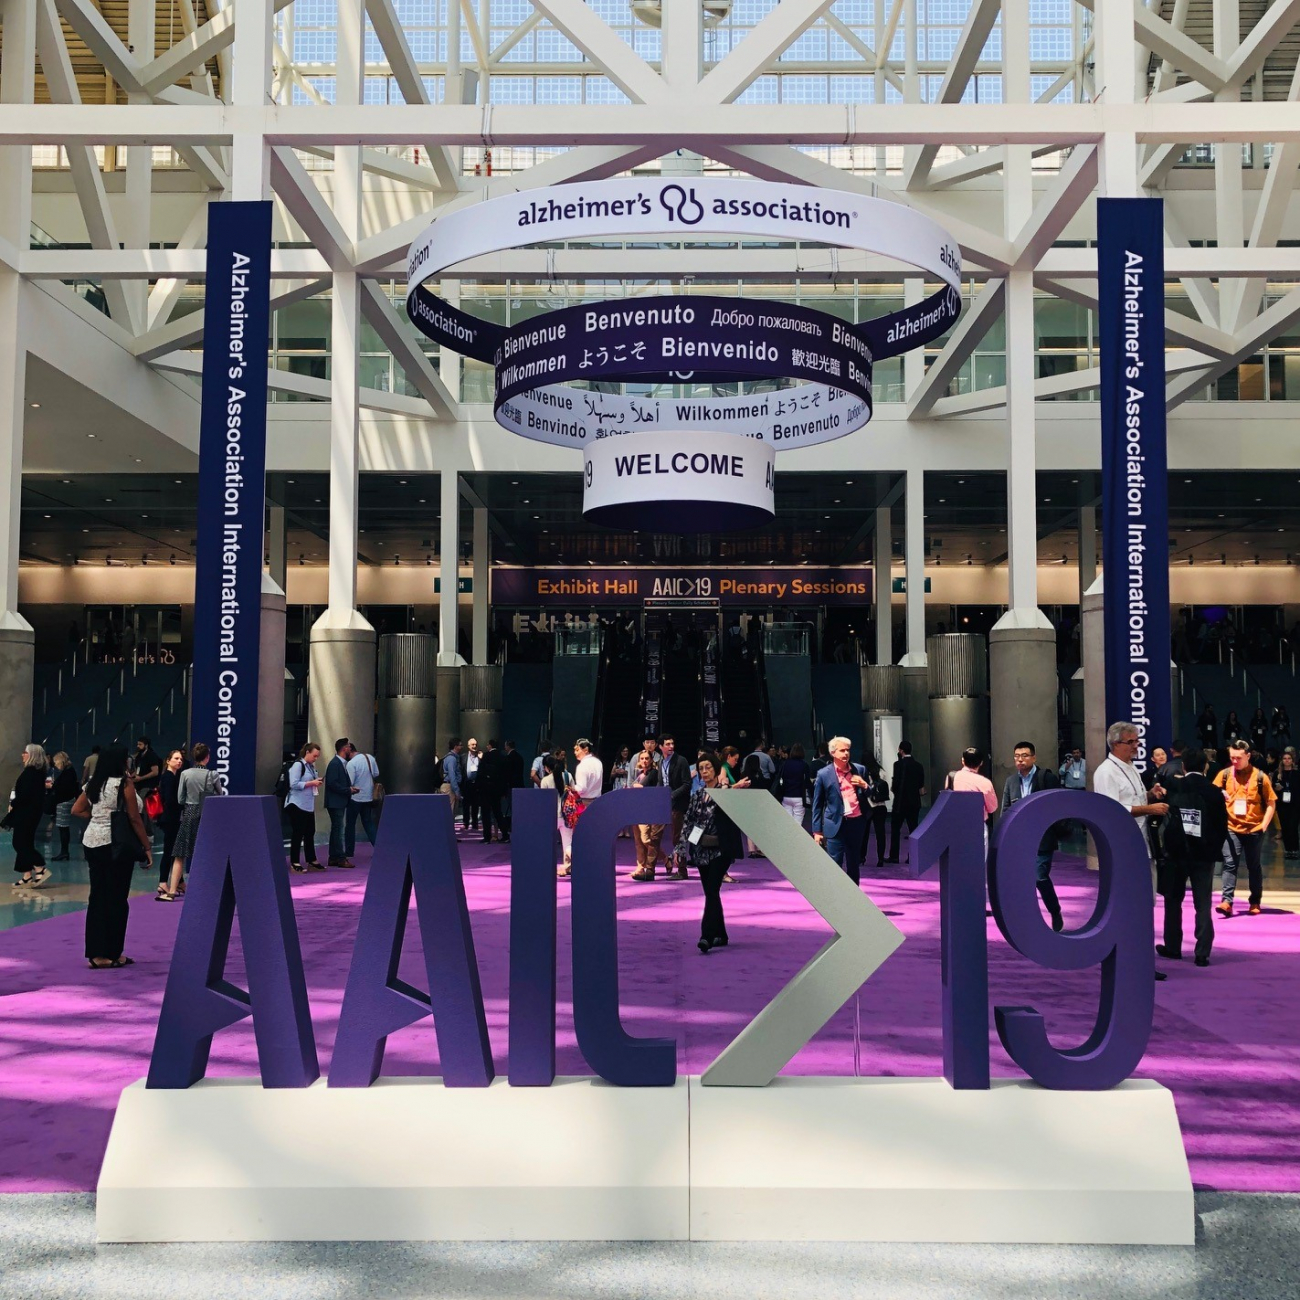 UWMadison researchers present abstracts, talks at AAIC 2019